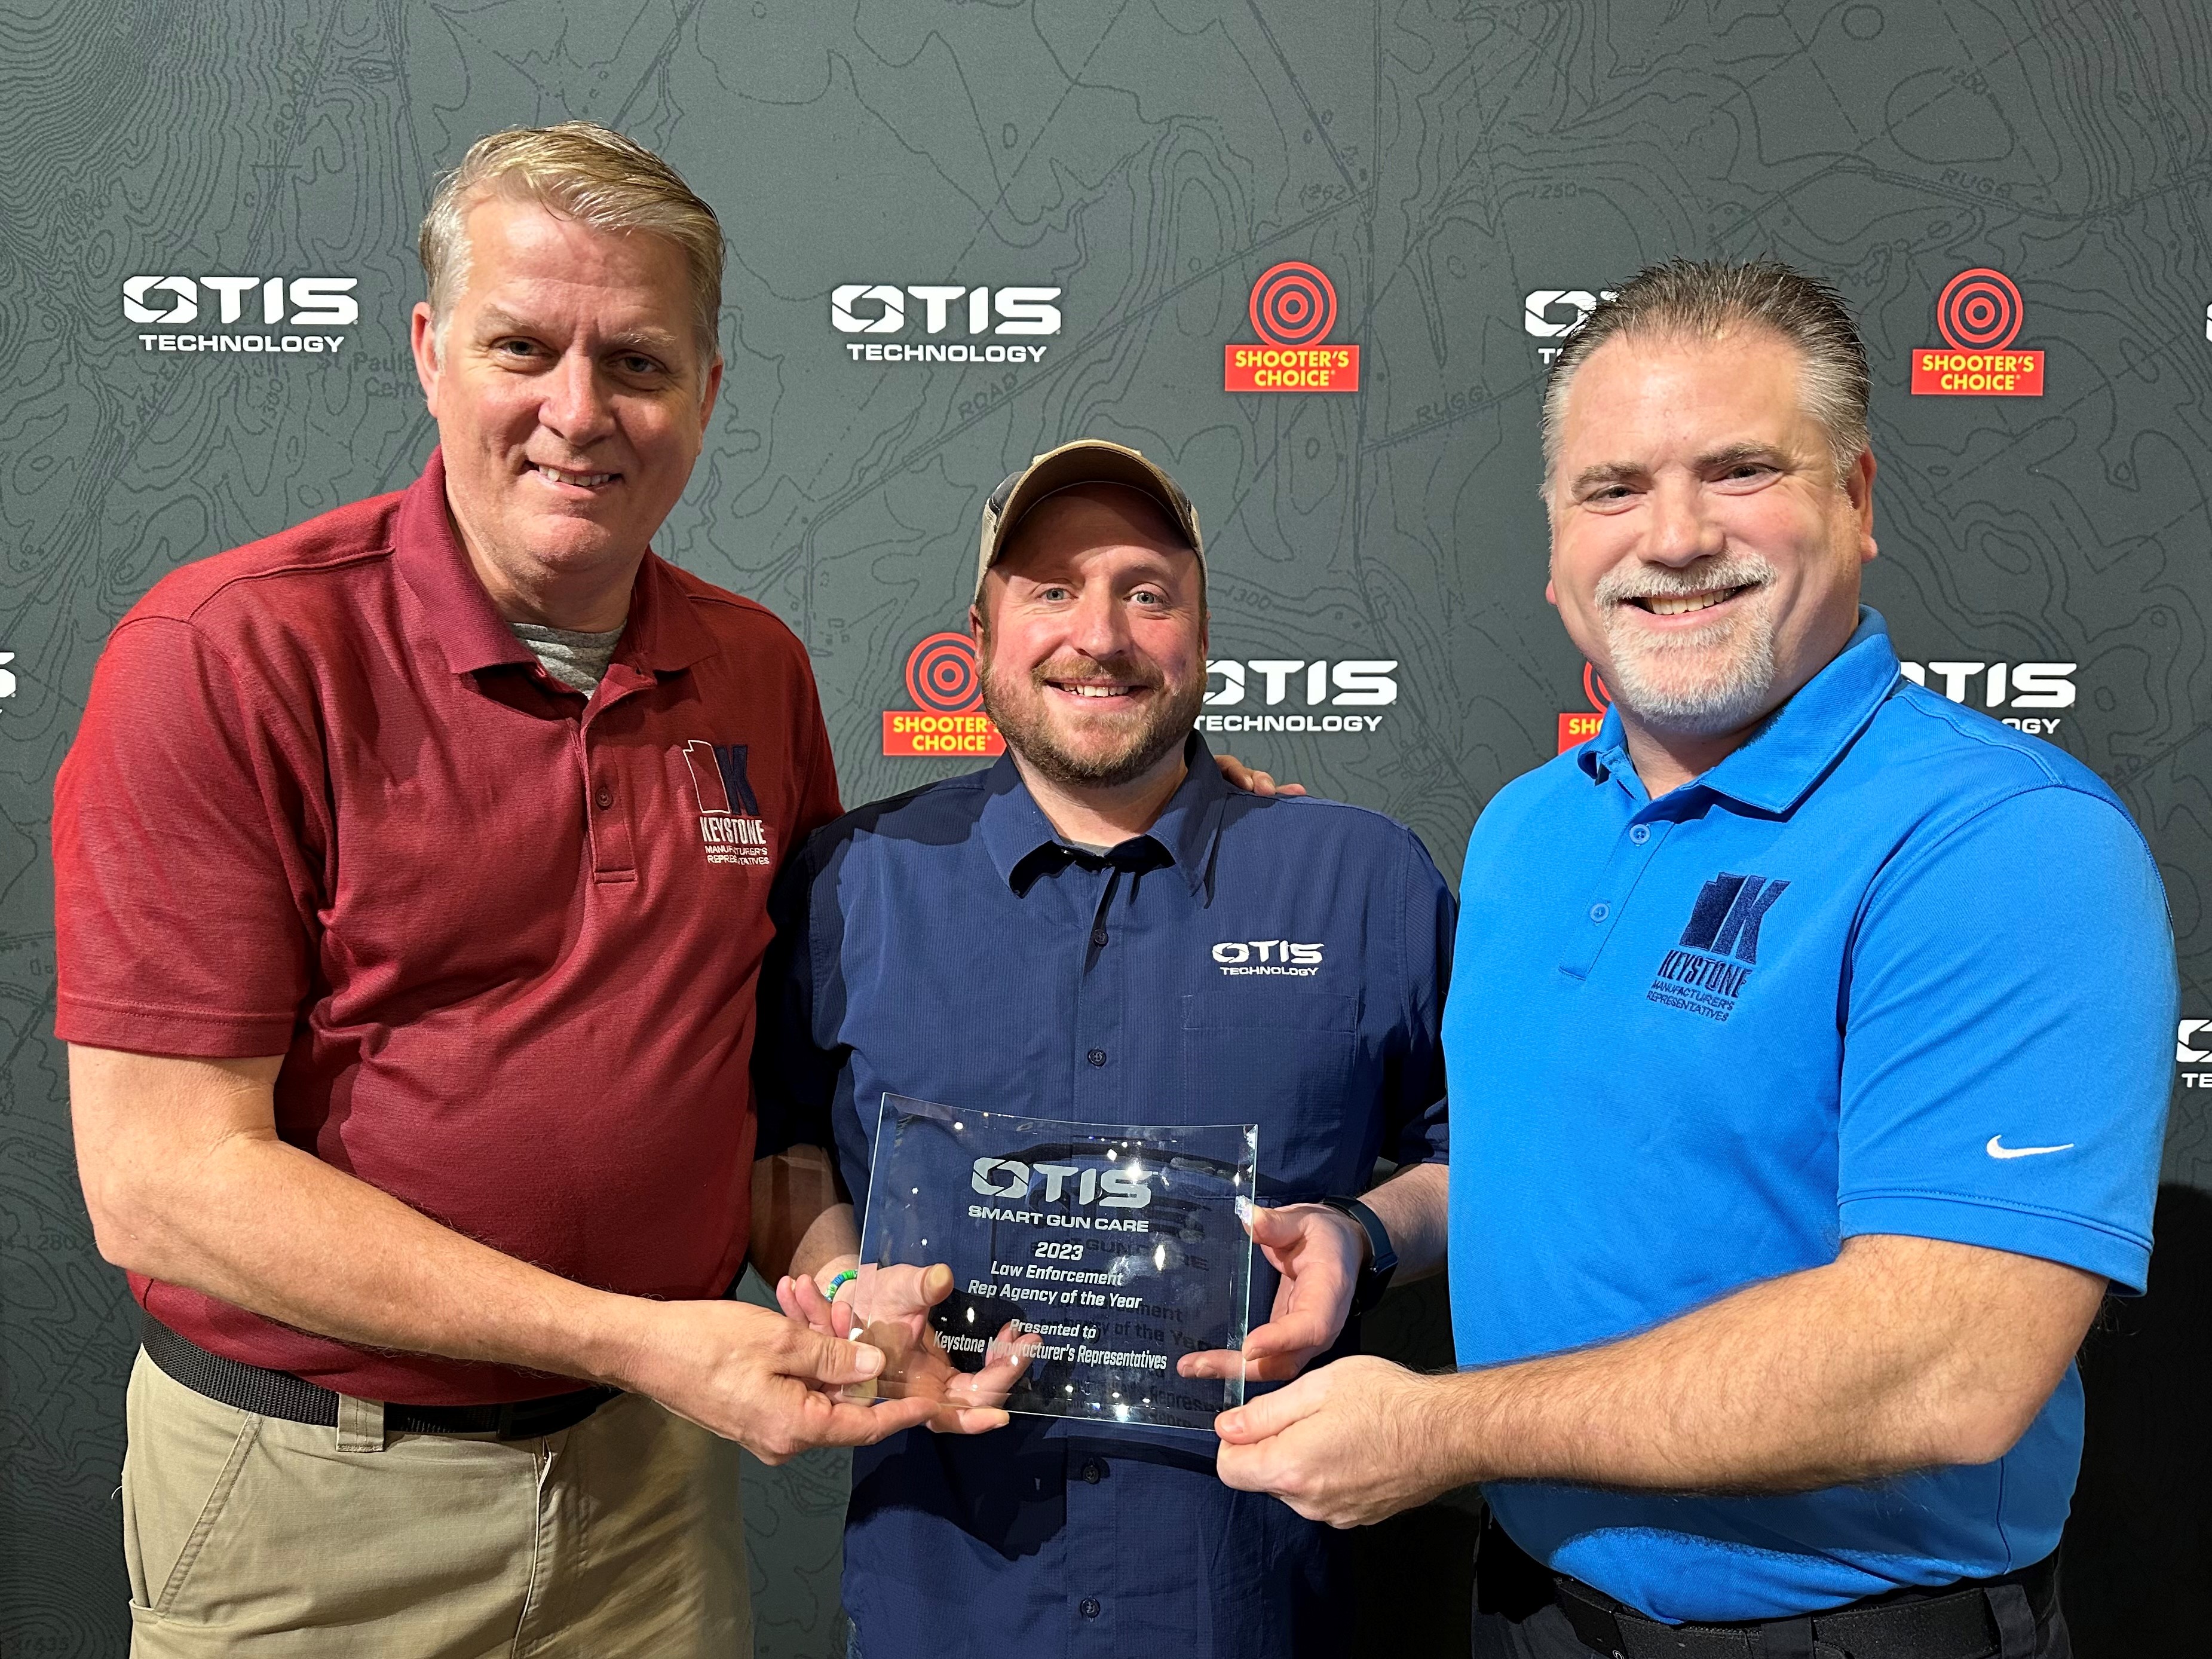 Chris Gaskin (left) and Mark Boisvert (right) from Keystone Manufacturer’s Representatives, receiving the Law Enforcement Sales Agency of the Year Award with Greg Essenlohr (Otis Technology, Law Enforcement and Government Sales Manager)